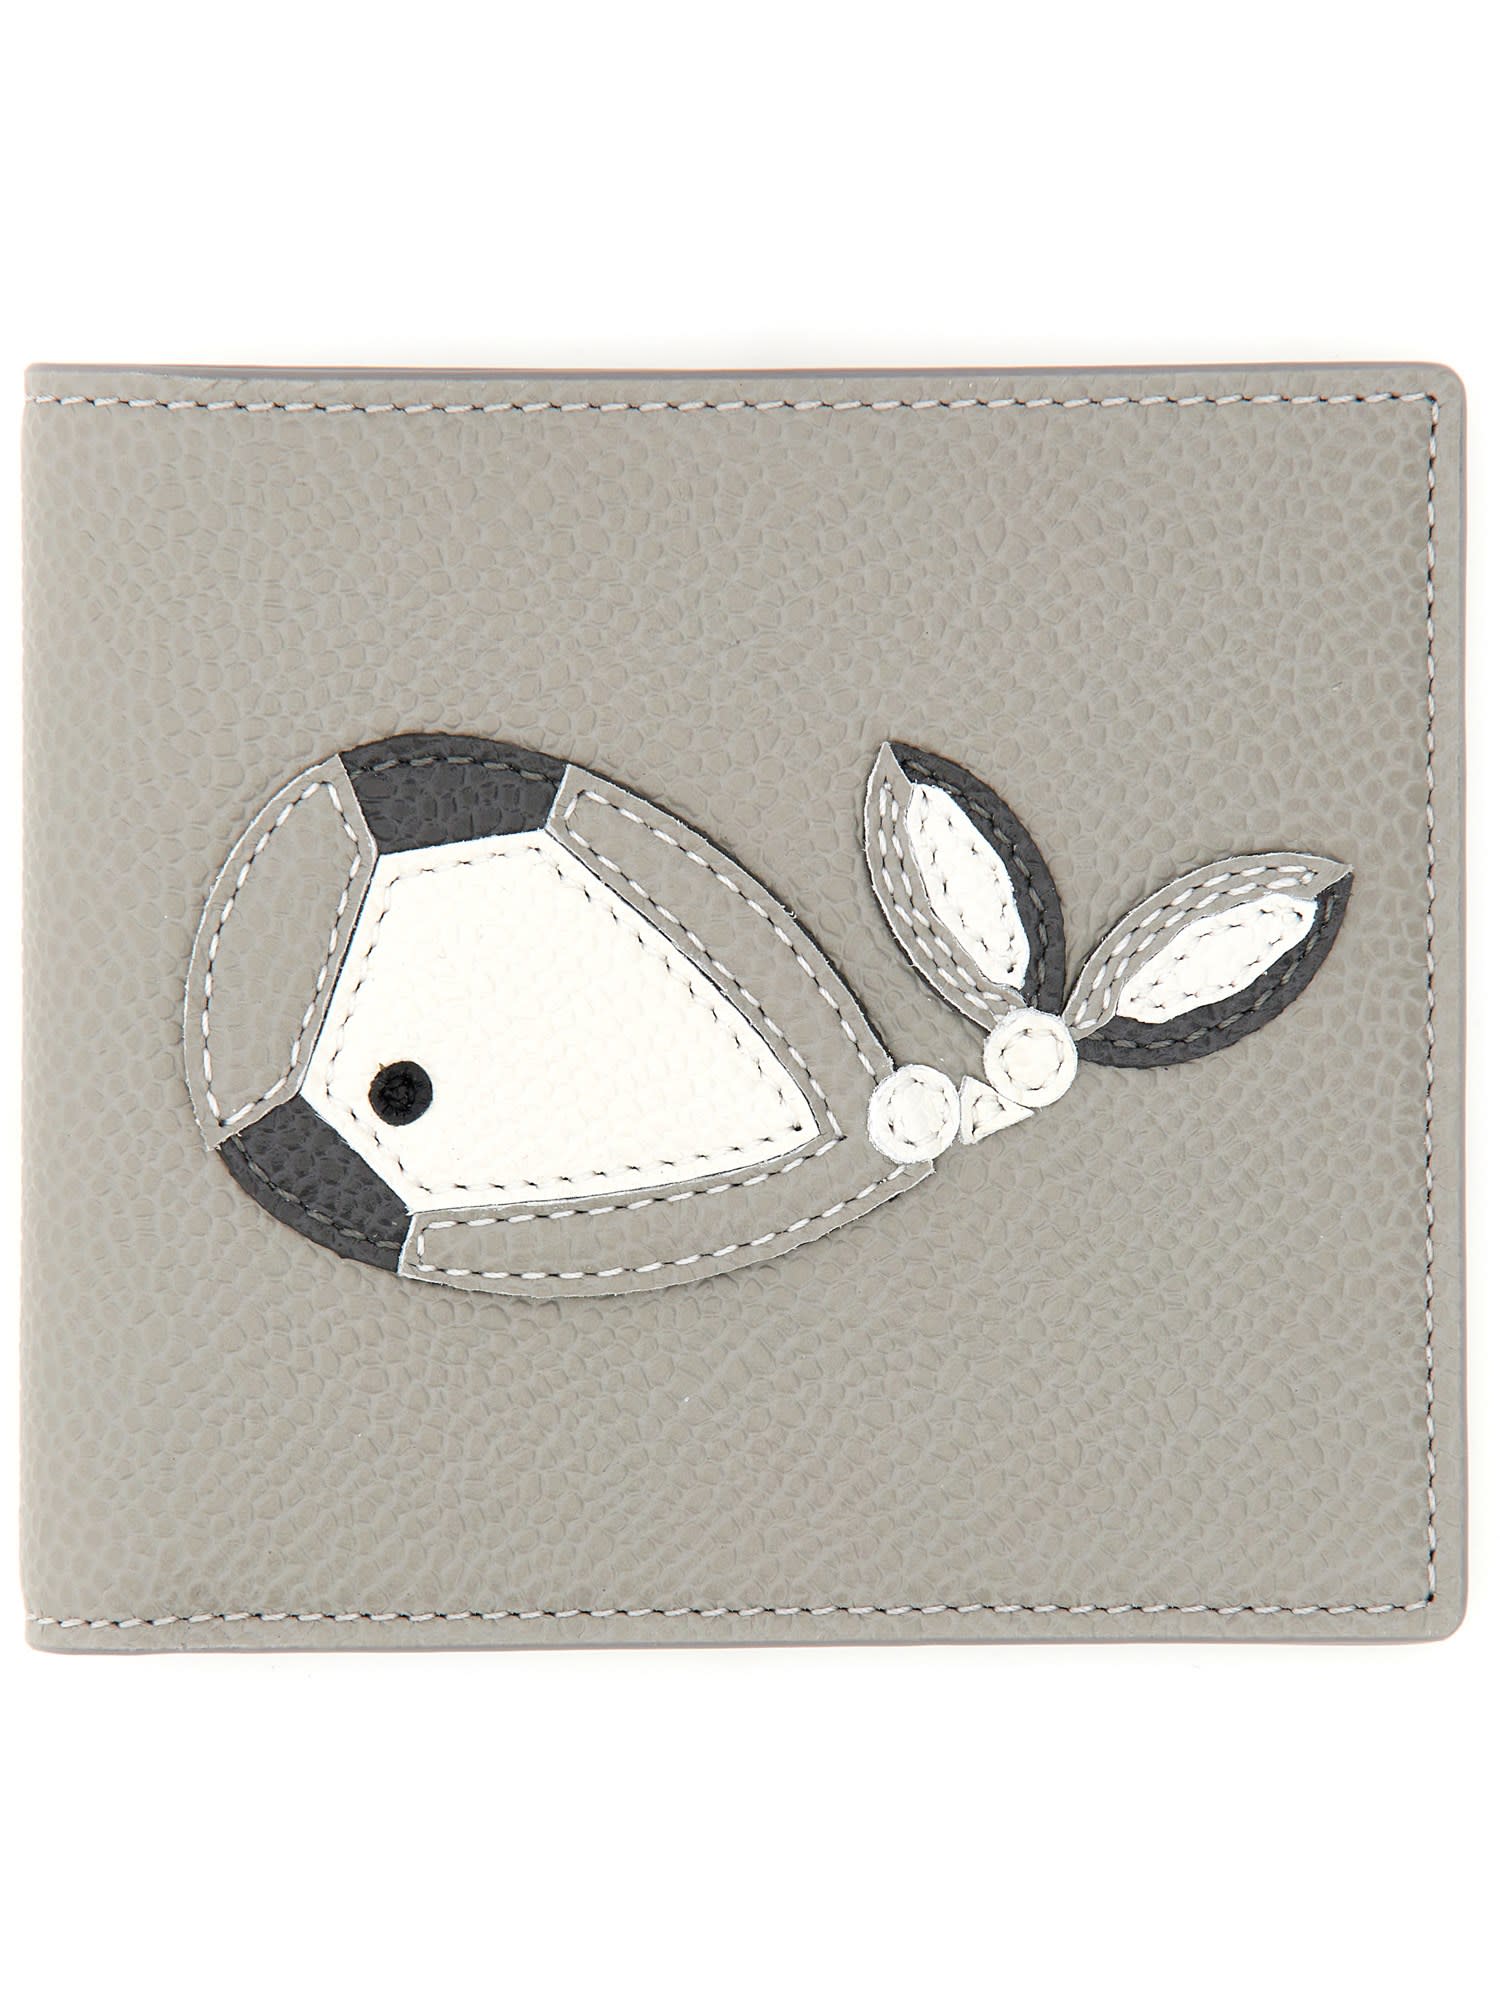 THOM BROWNE WALLET WITH WHALE APPLICATION